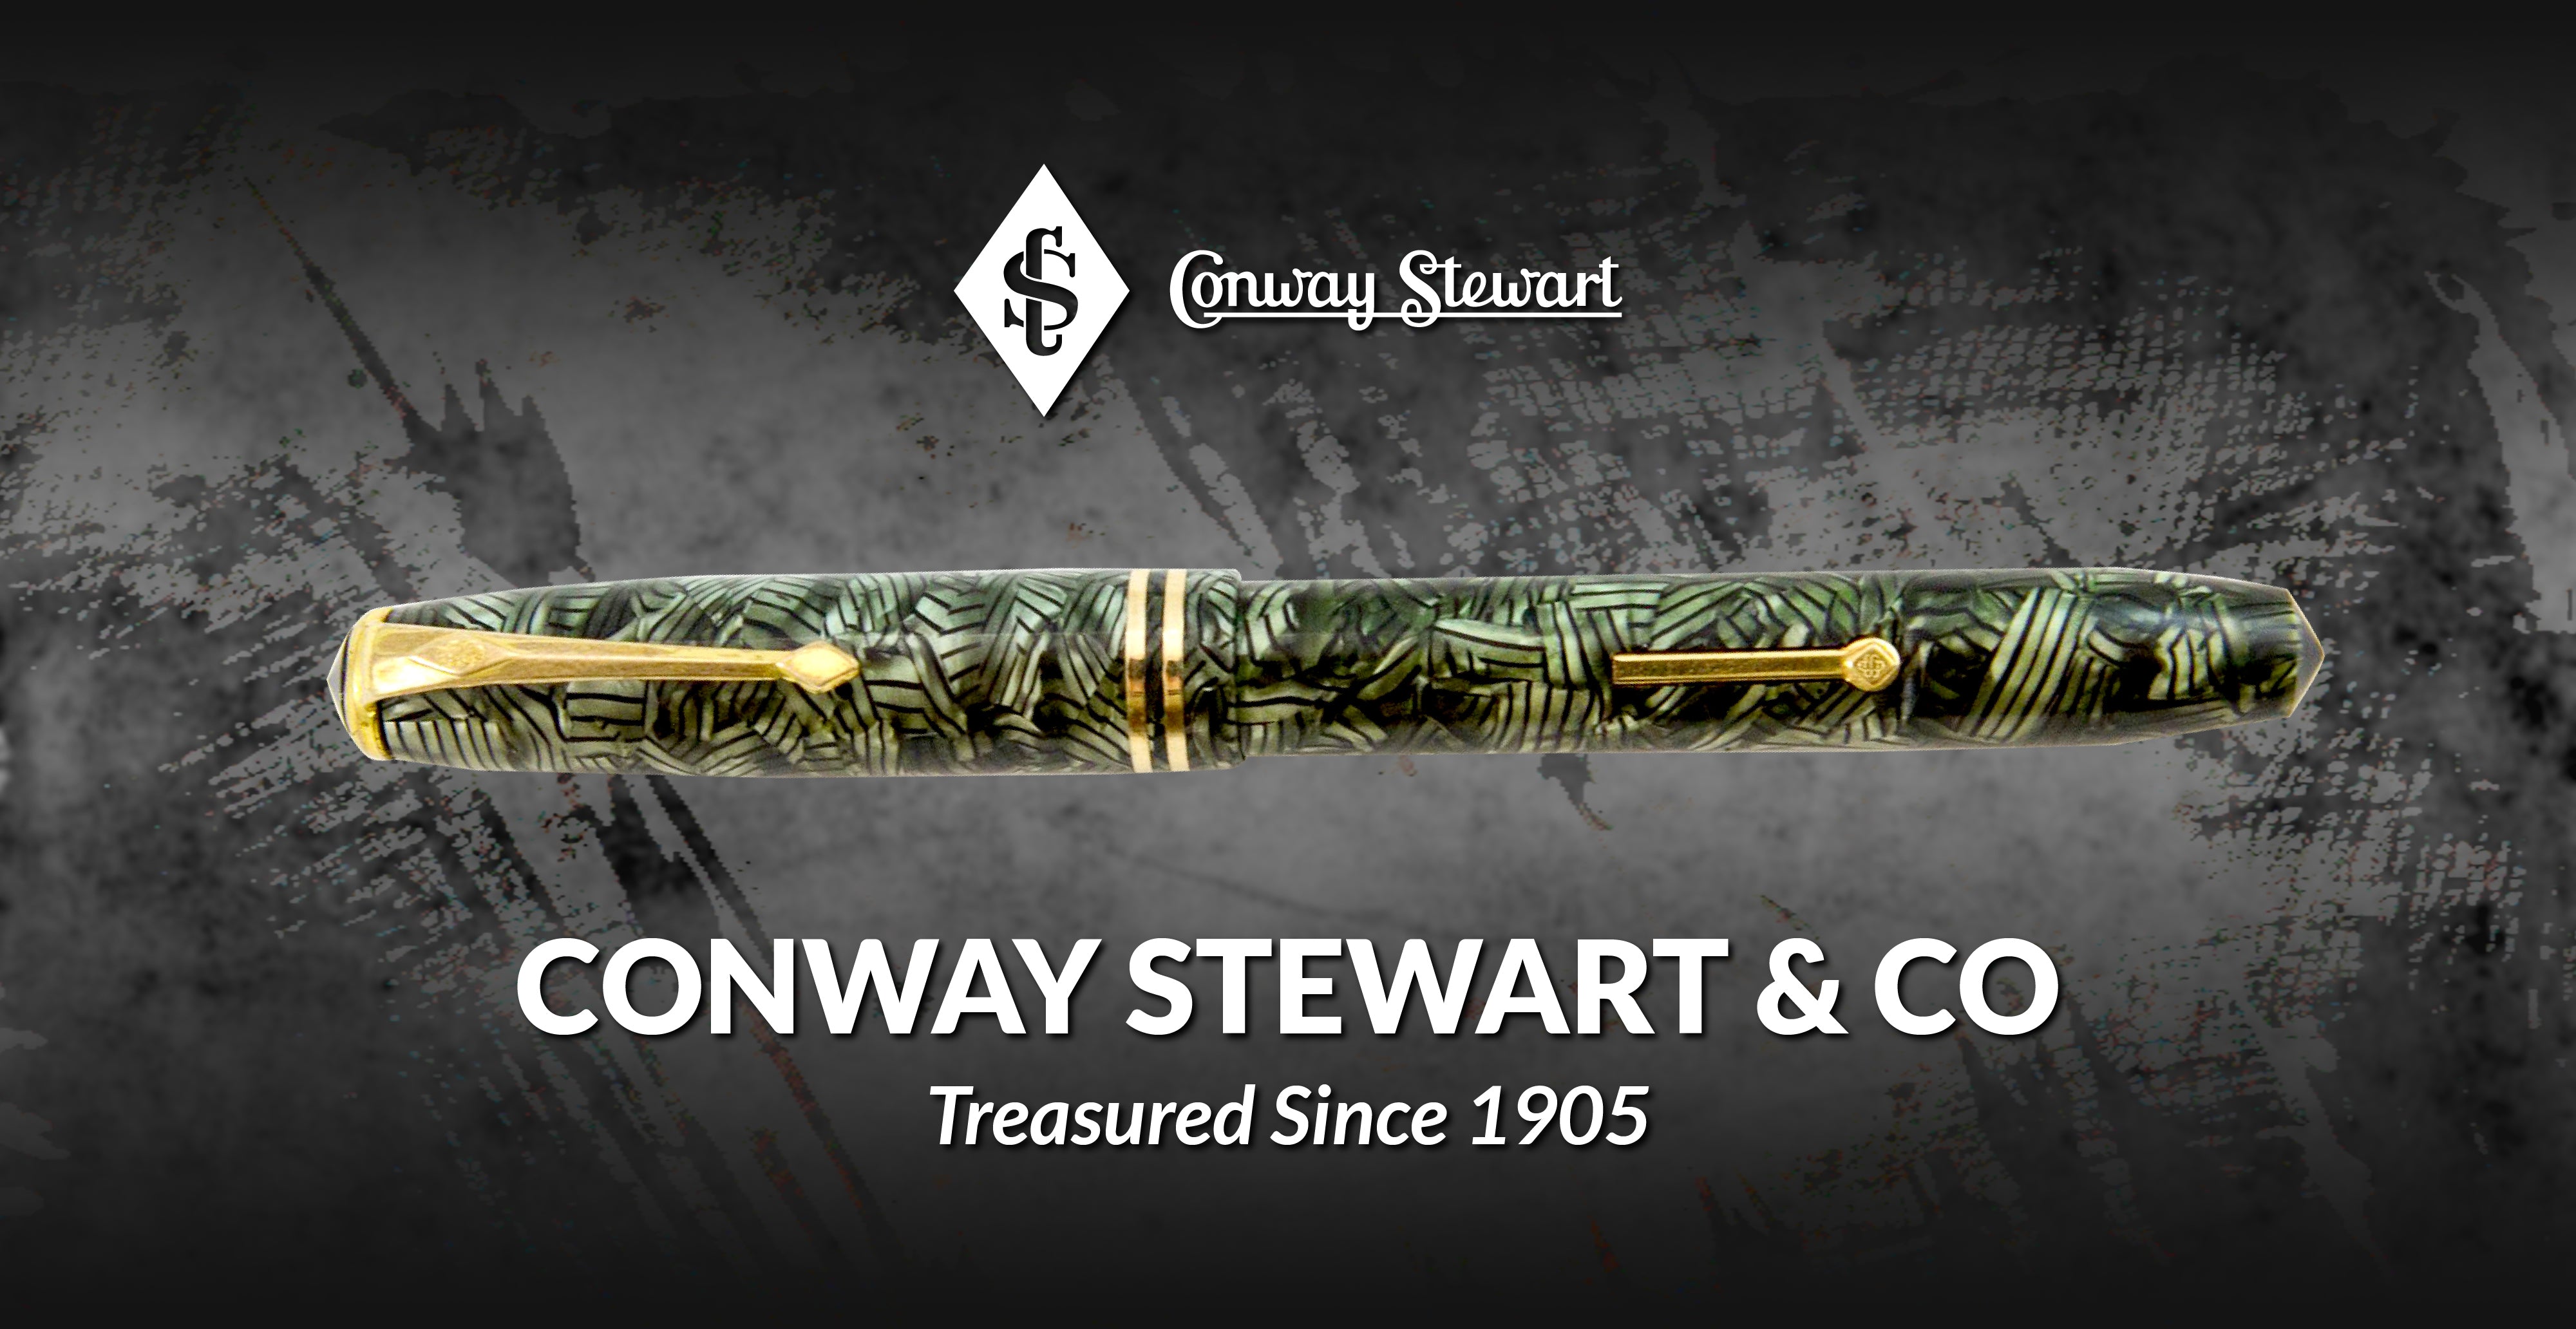 The History of Conway Stewart